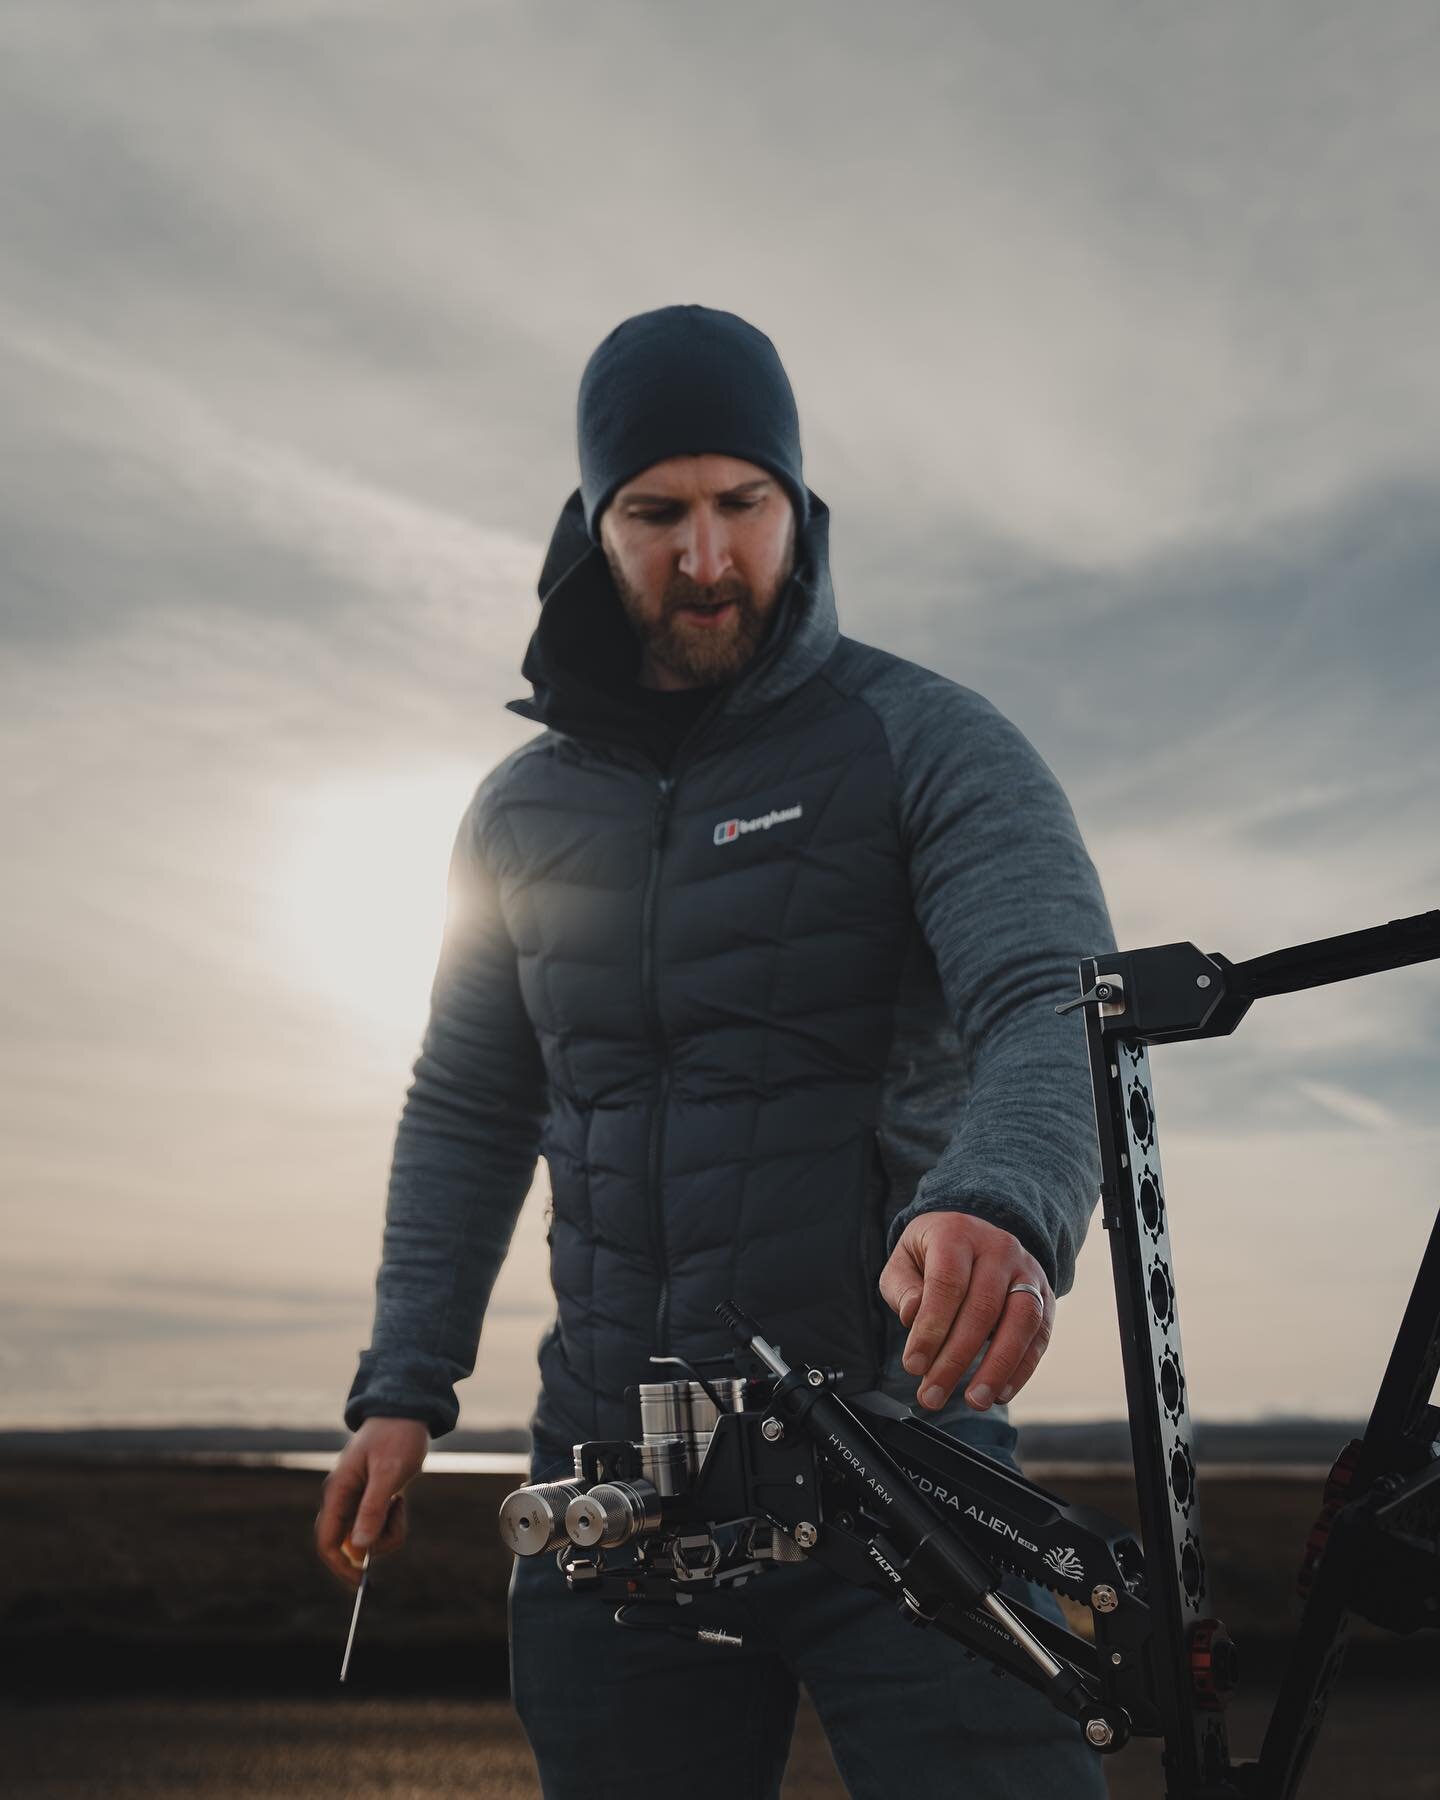 Why is it every time I get this rig out it&rsquo;s freezing cold! The joys of Scotland eh?! Swipe to see the results! Anyone looking forward to some colder weather?
📷 @coiacreative 
.
.
.
.
.
#stellar #filmmaking #videography #photography #tilta #ti